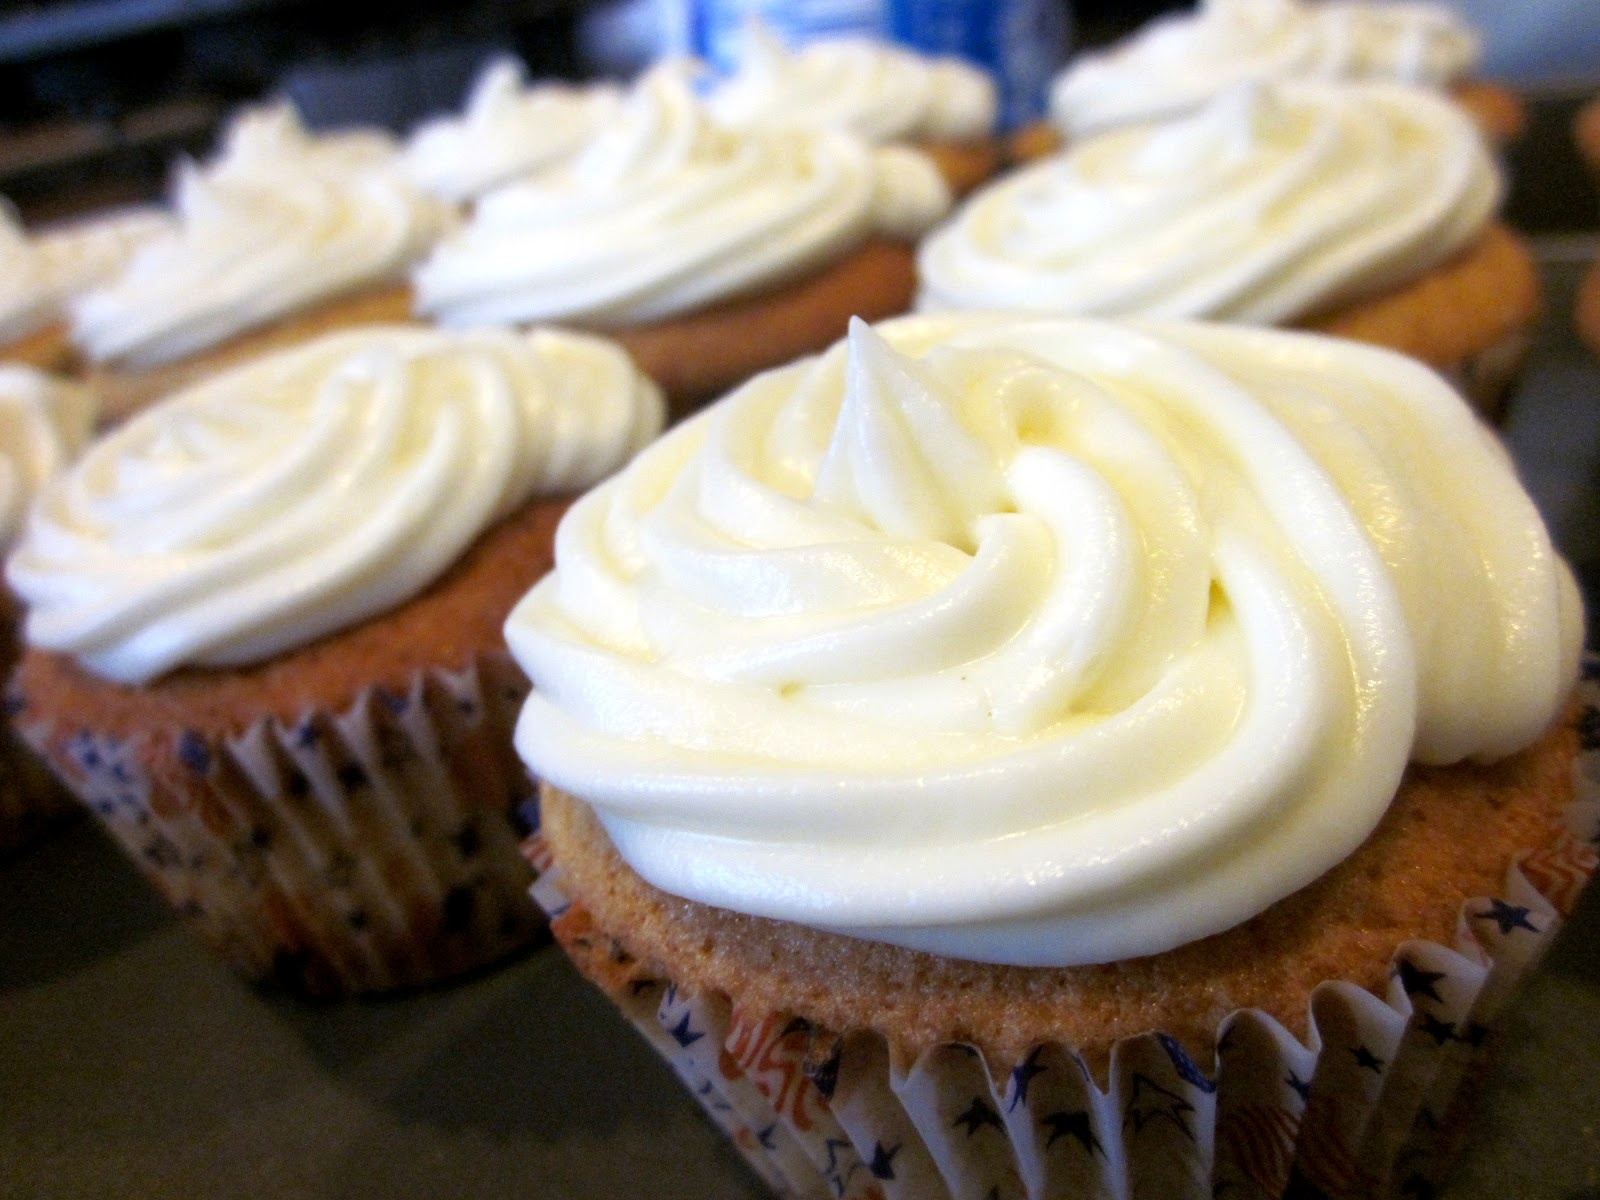 Vanilla Cupcakes Made From Scratch Recipes